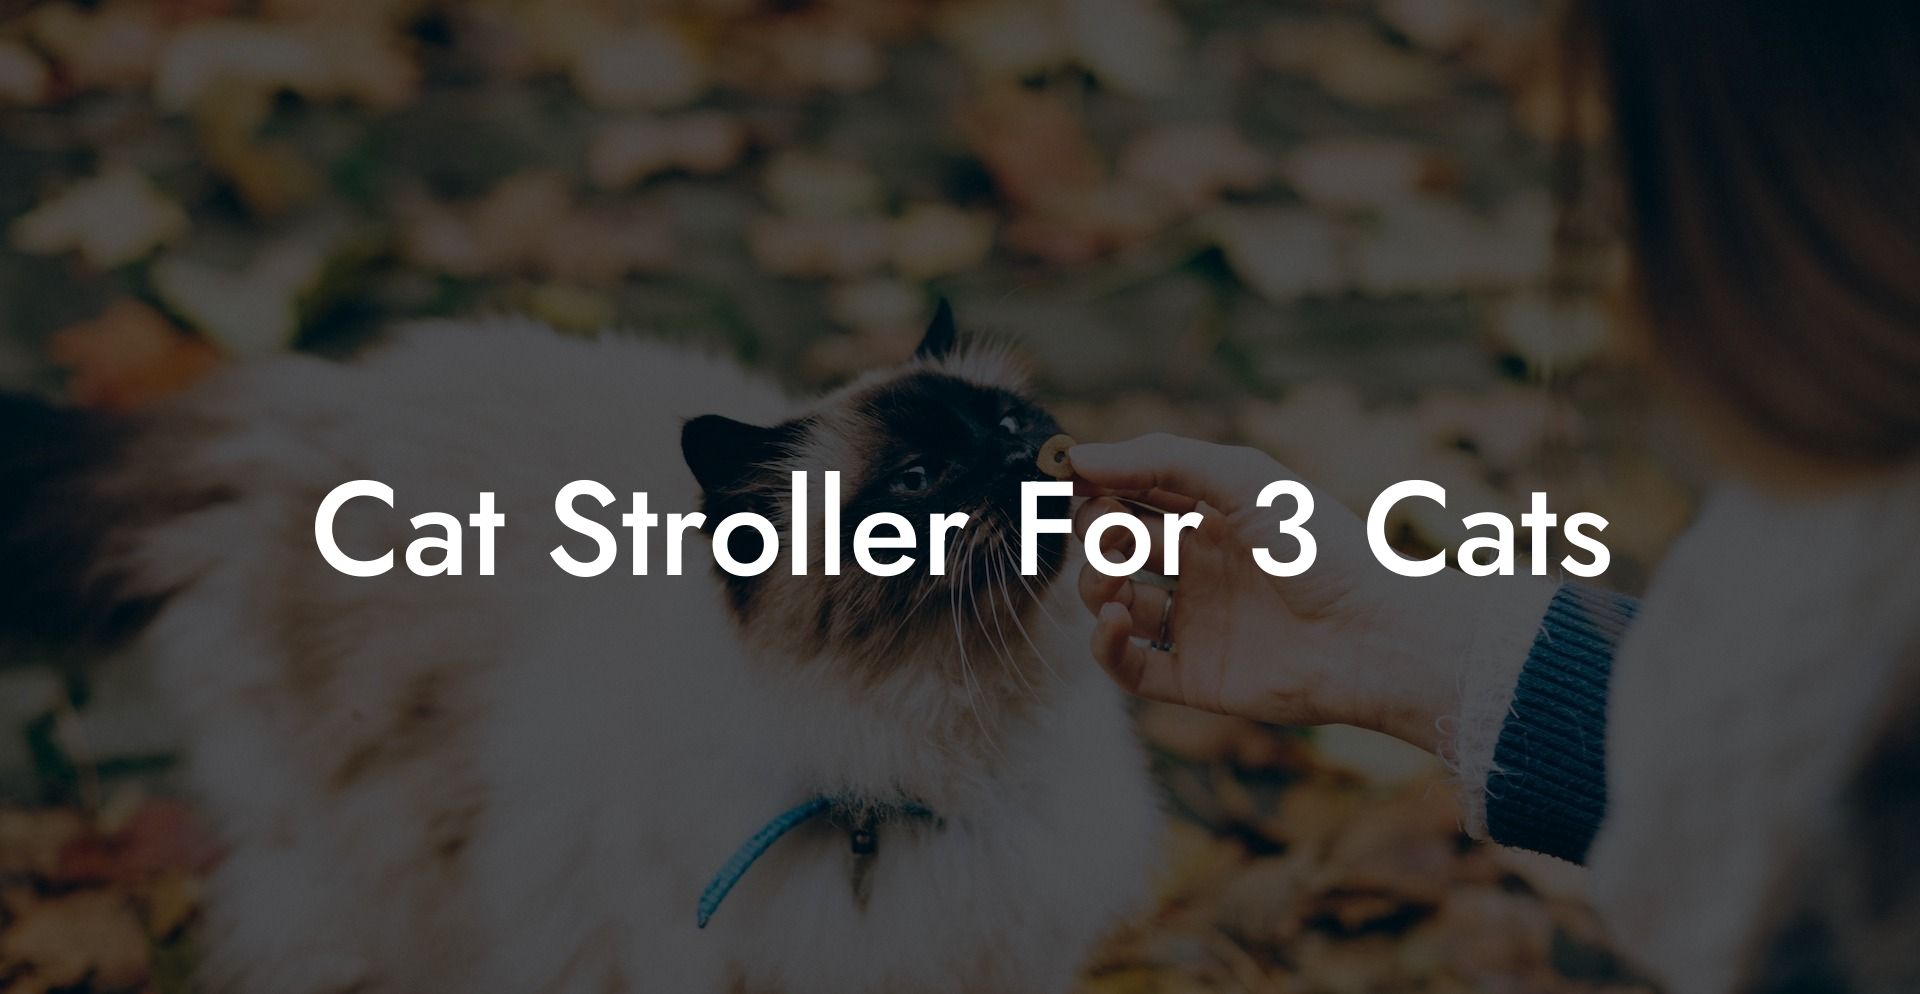 Cat Stroller For 3 Cats